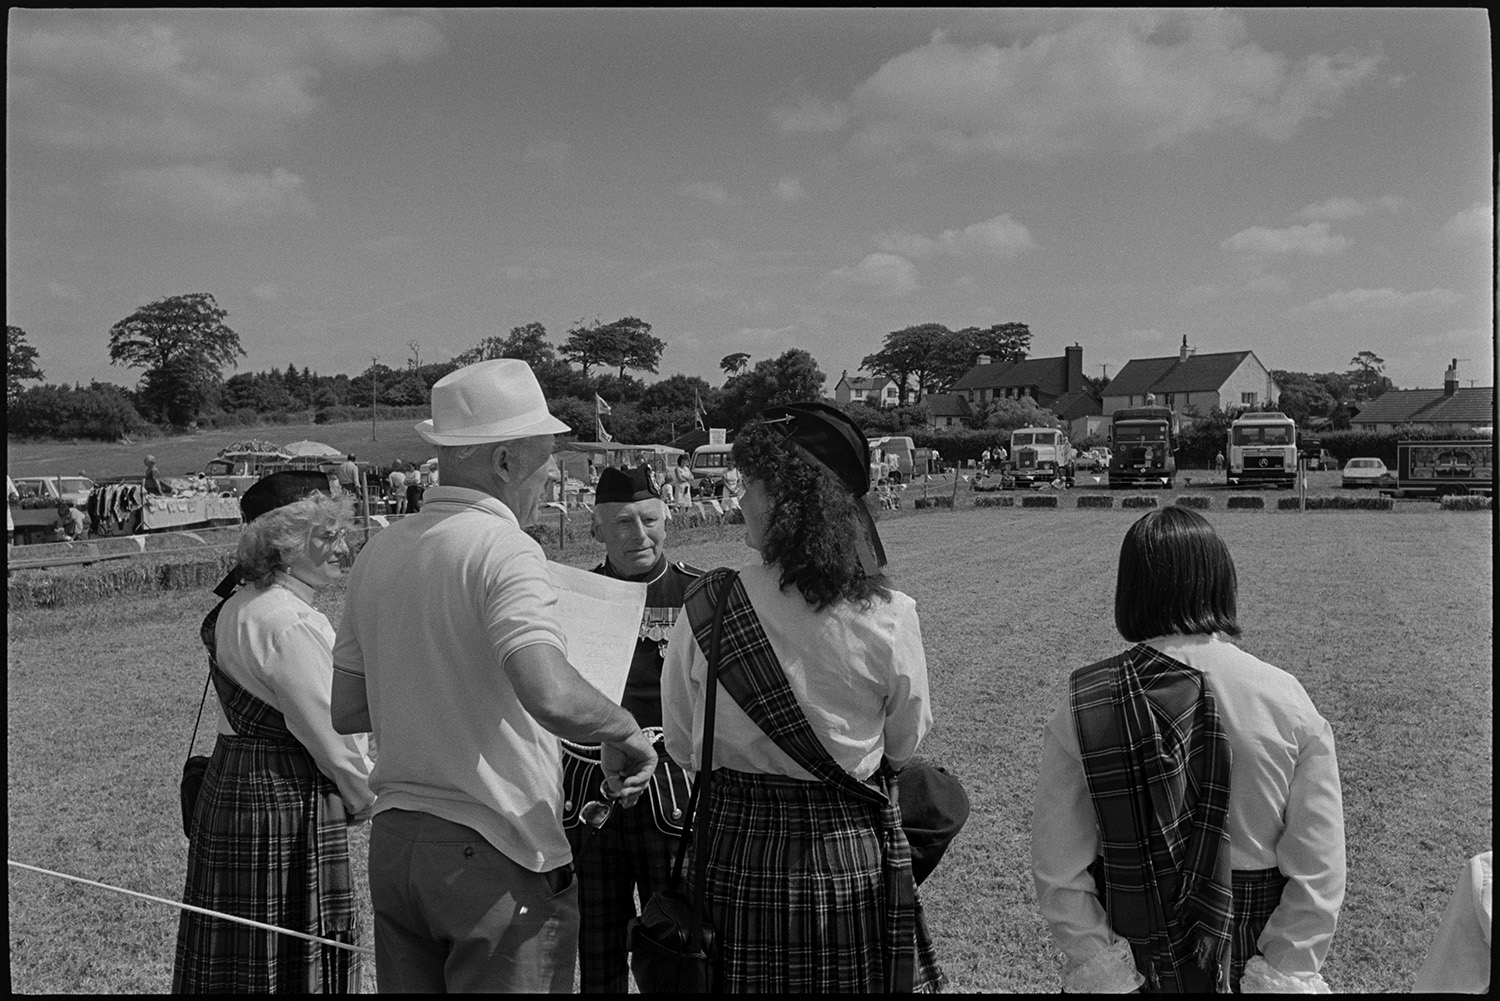 Country fair, vintage cars, sheep being rounded up for show.
[Three woman dressed in tartan, and a man in uniform at  Ashreigney Country Fair. There is a parade ring bordered by straw bales, with various stalls and vintage vehicles on display around it.]